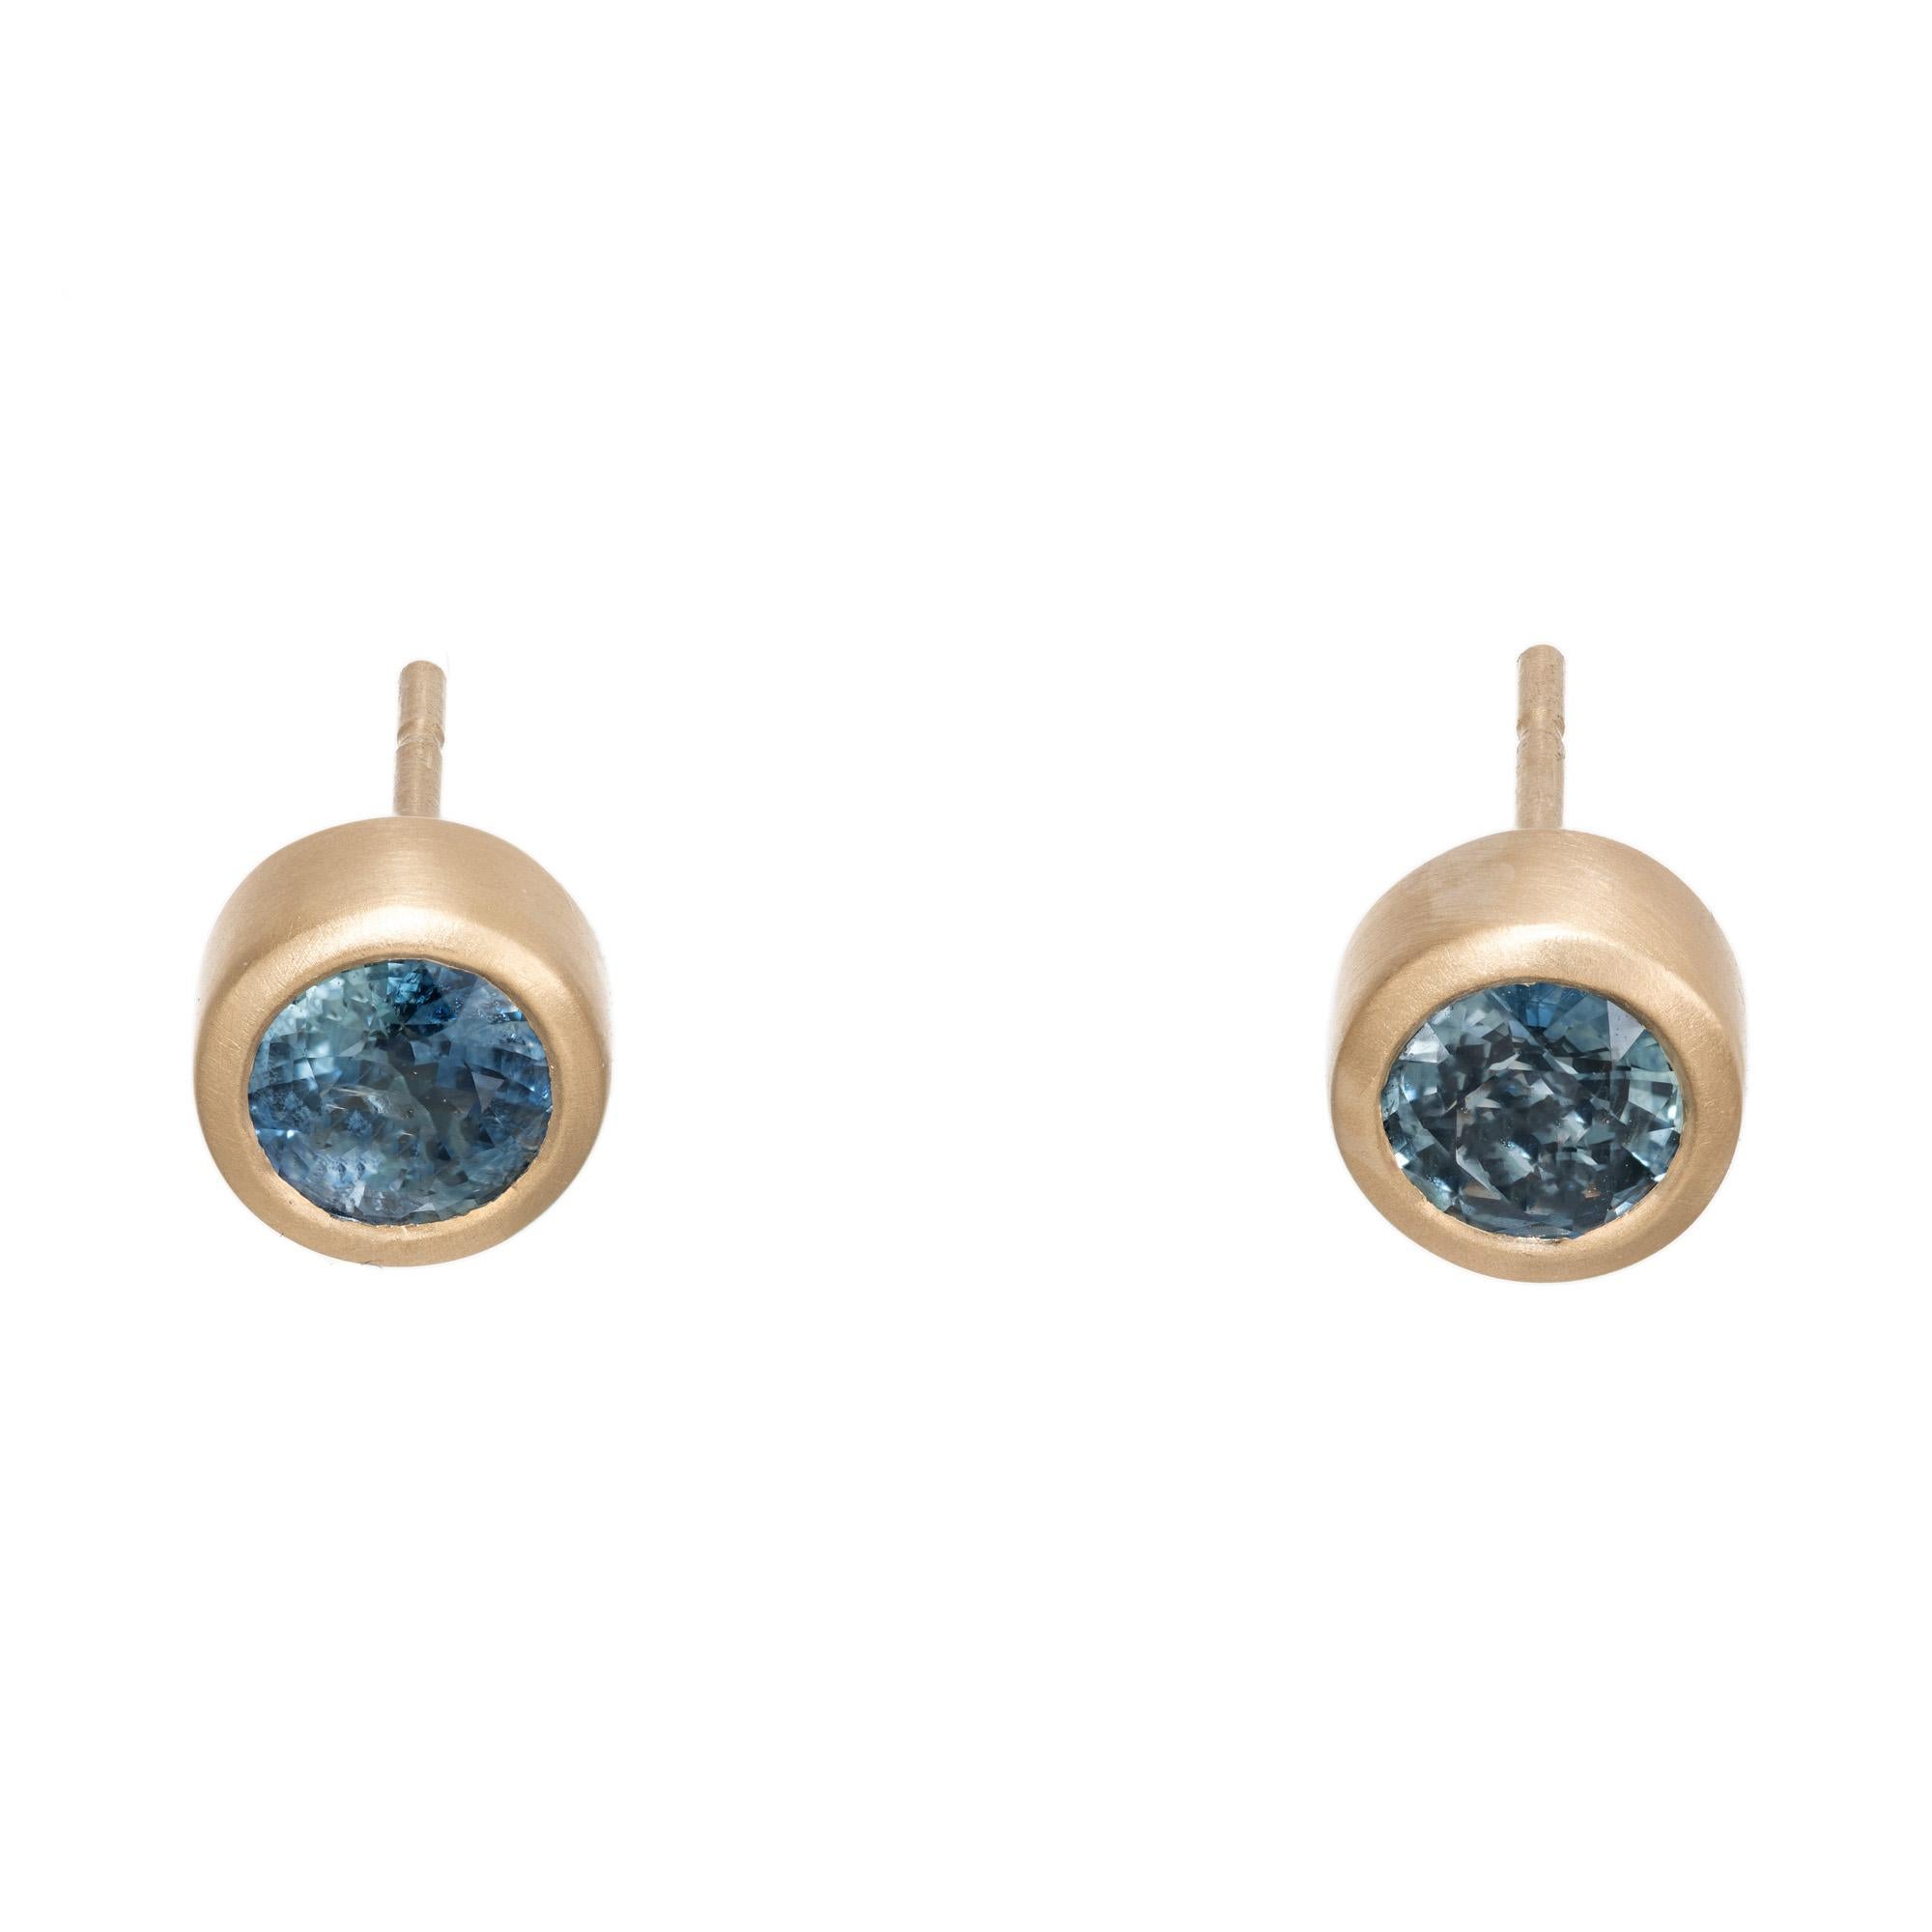 Blue slightly greenish sapphire bezel set sapphire stud earrings. 2 round cut Ceylon sapphires with an approximate carat total weight of .98cts, set in soft brush nickel 18k yellow gold tube bezel settings. These sapphire have unique coloring, blue